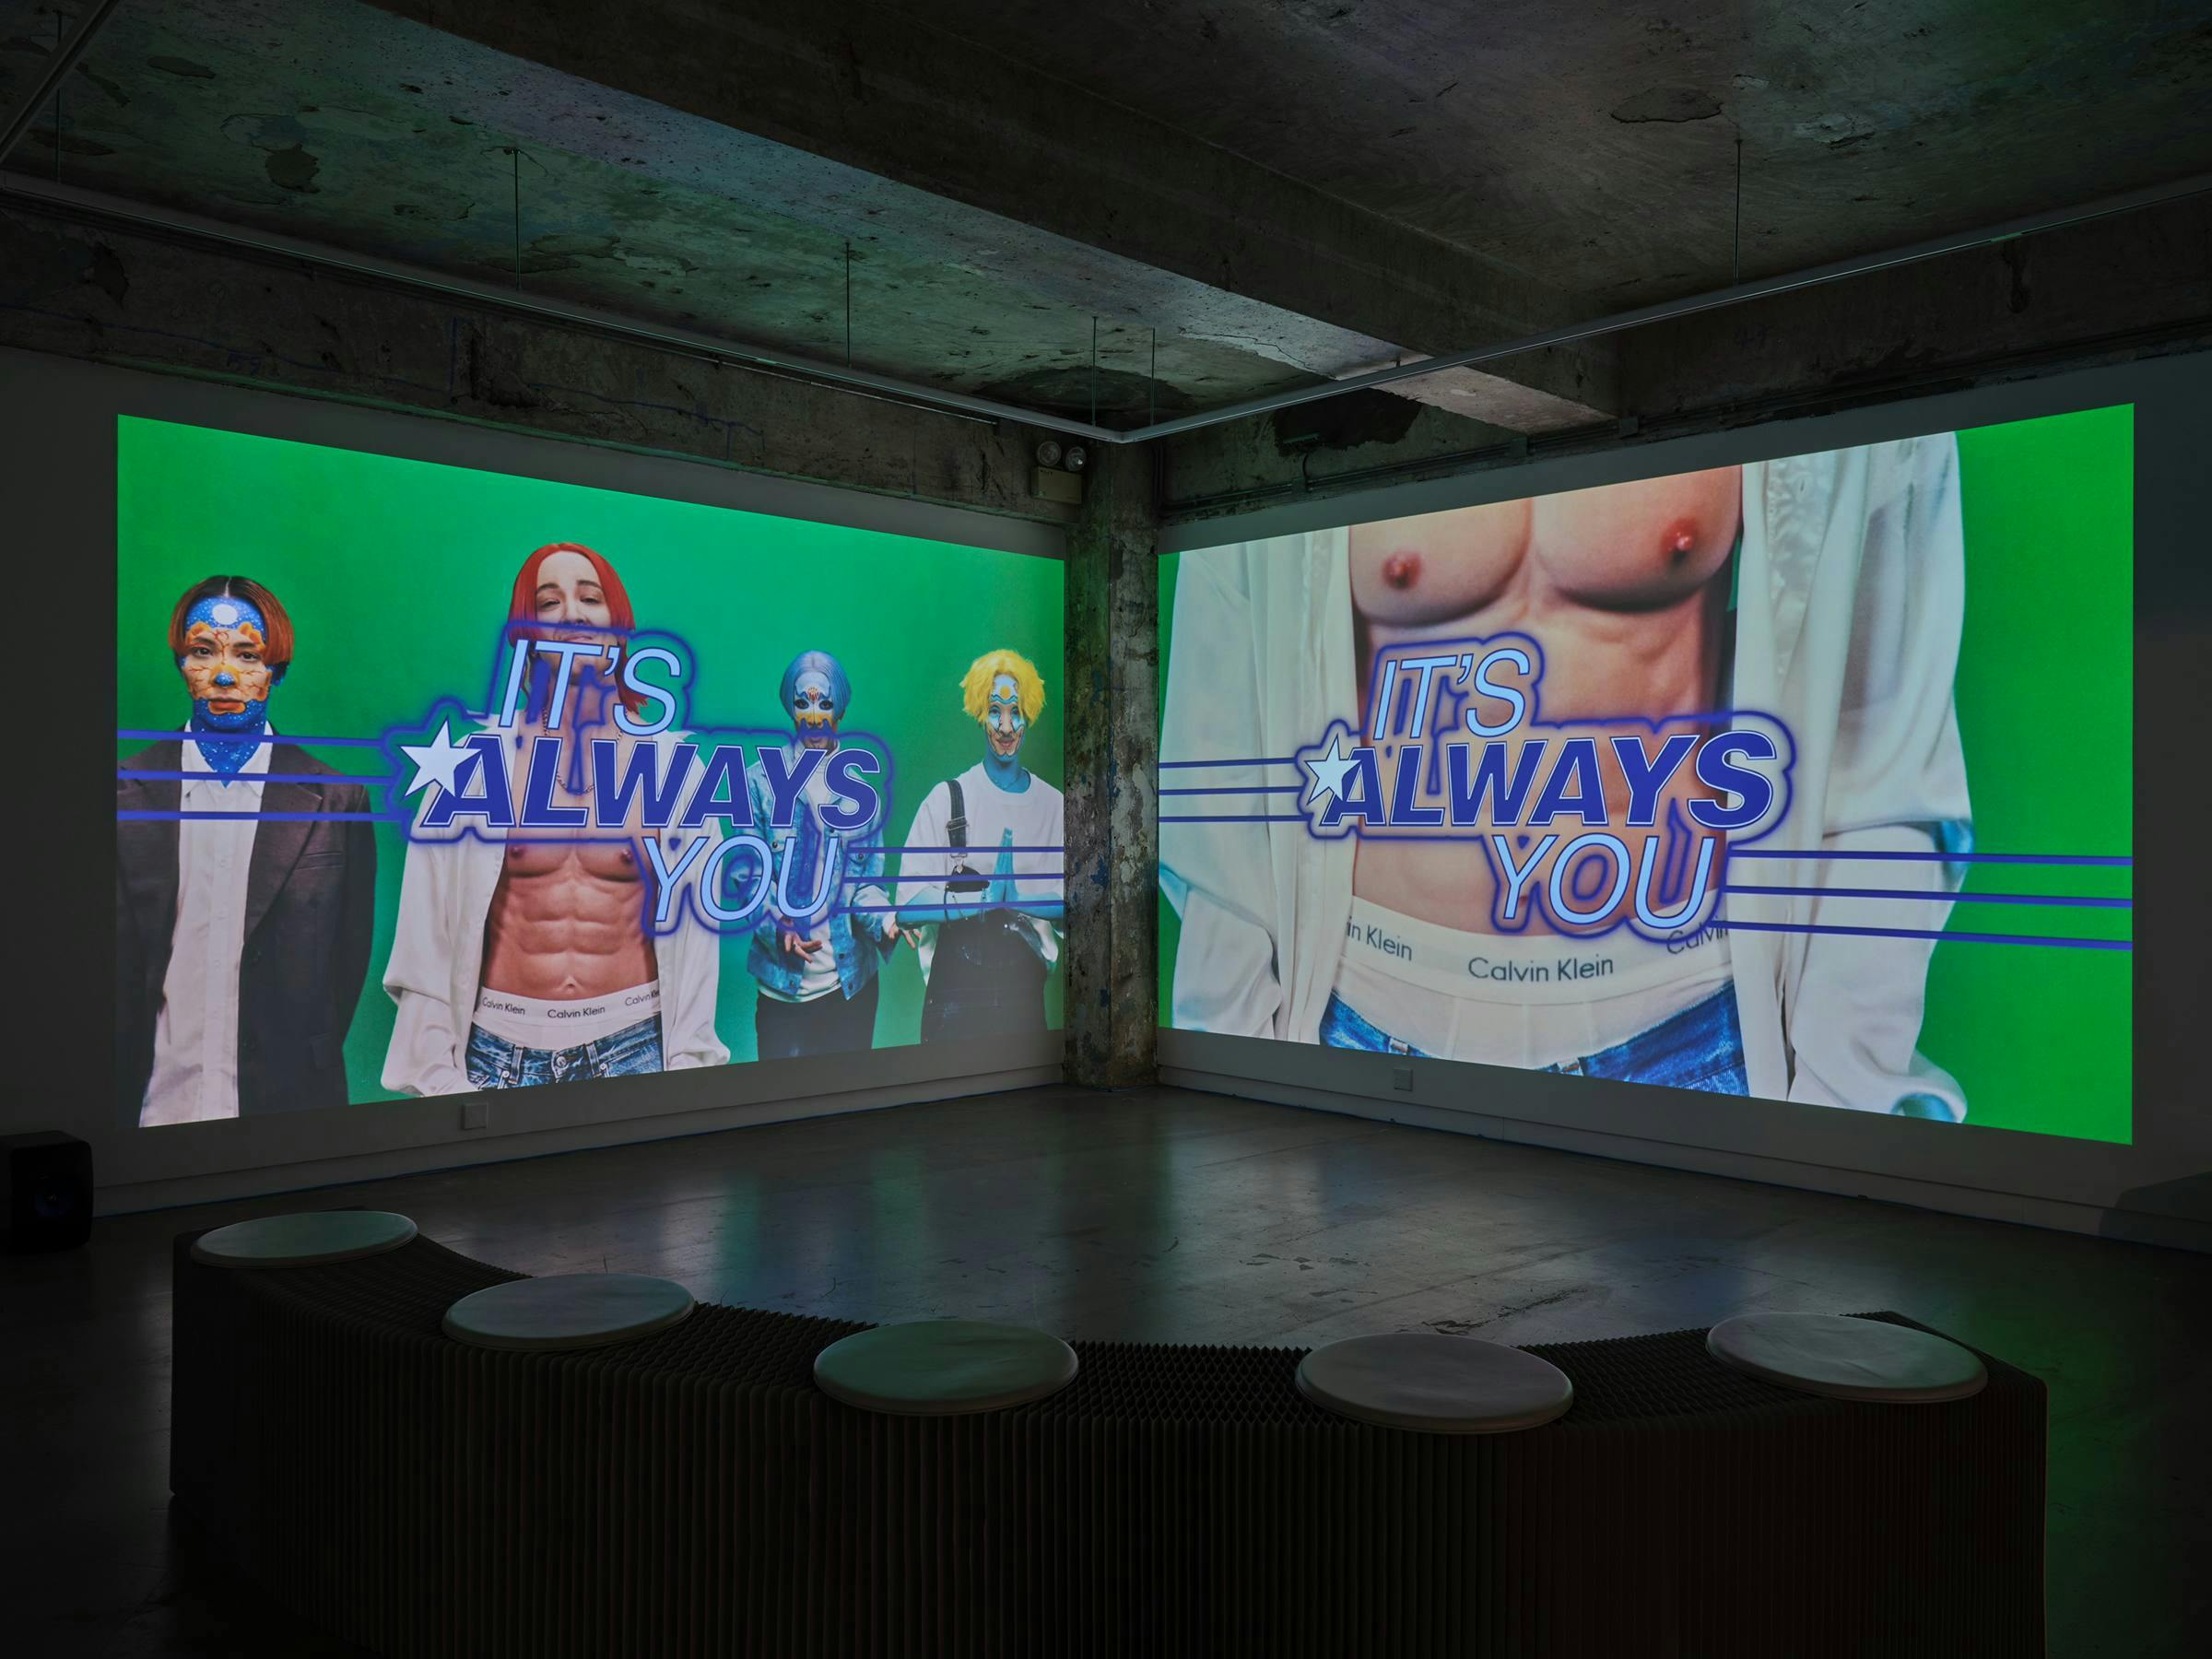 a gallery space with 2 projections that meet in a corner. There is seating in front of the projections. The space is industrial.